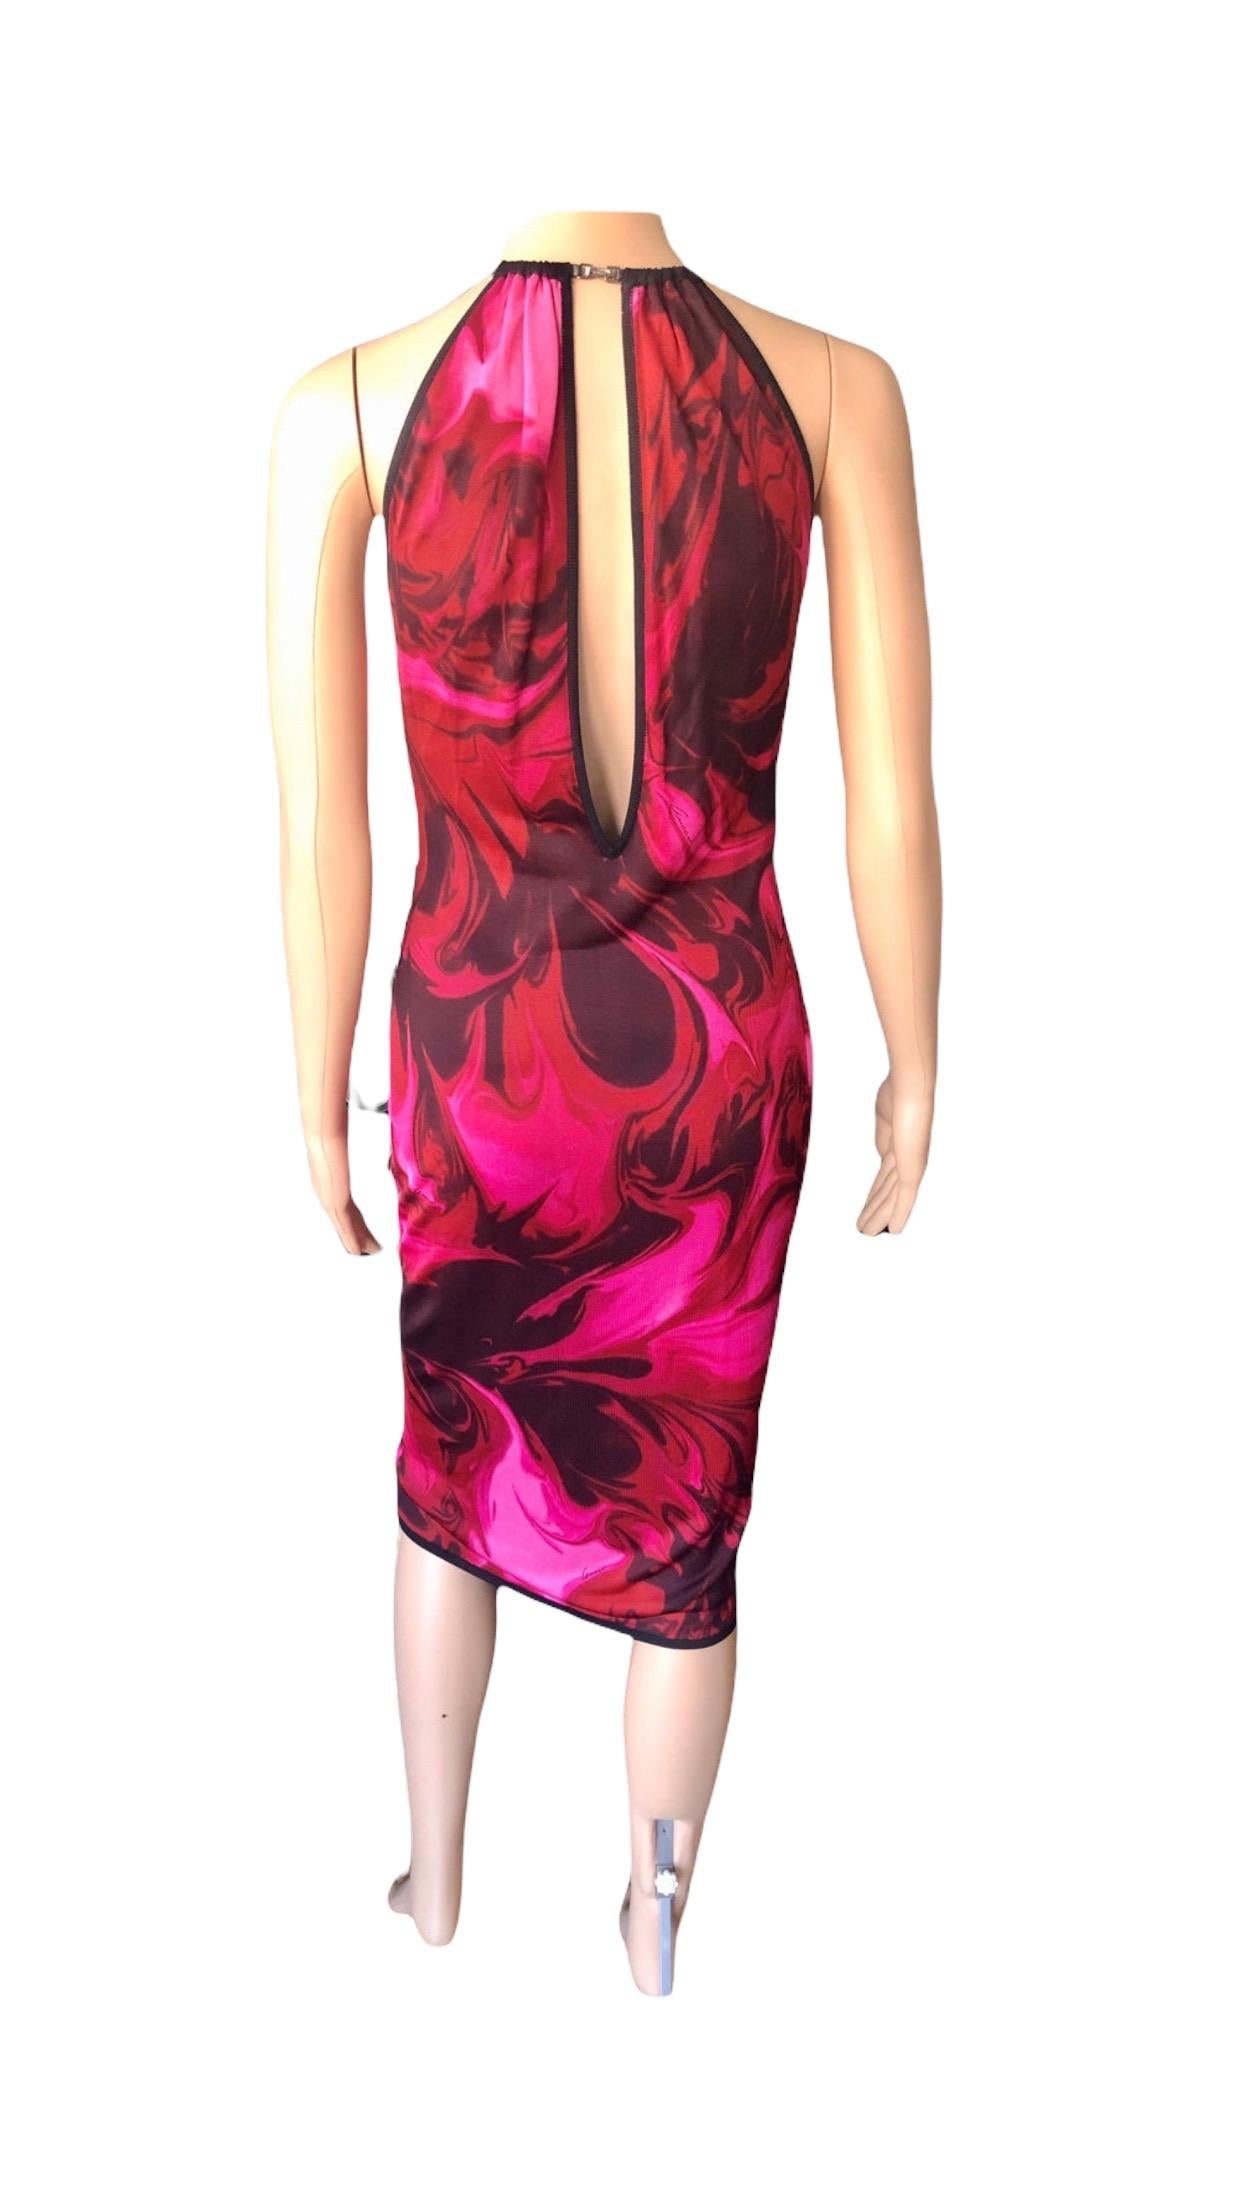 Tom Ford for Gucci S/S 2001 Bodycon Knit Printed Midi Dress 4